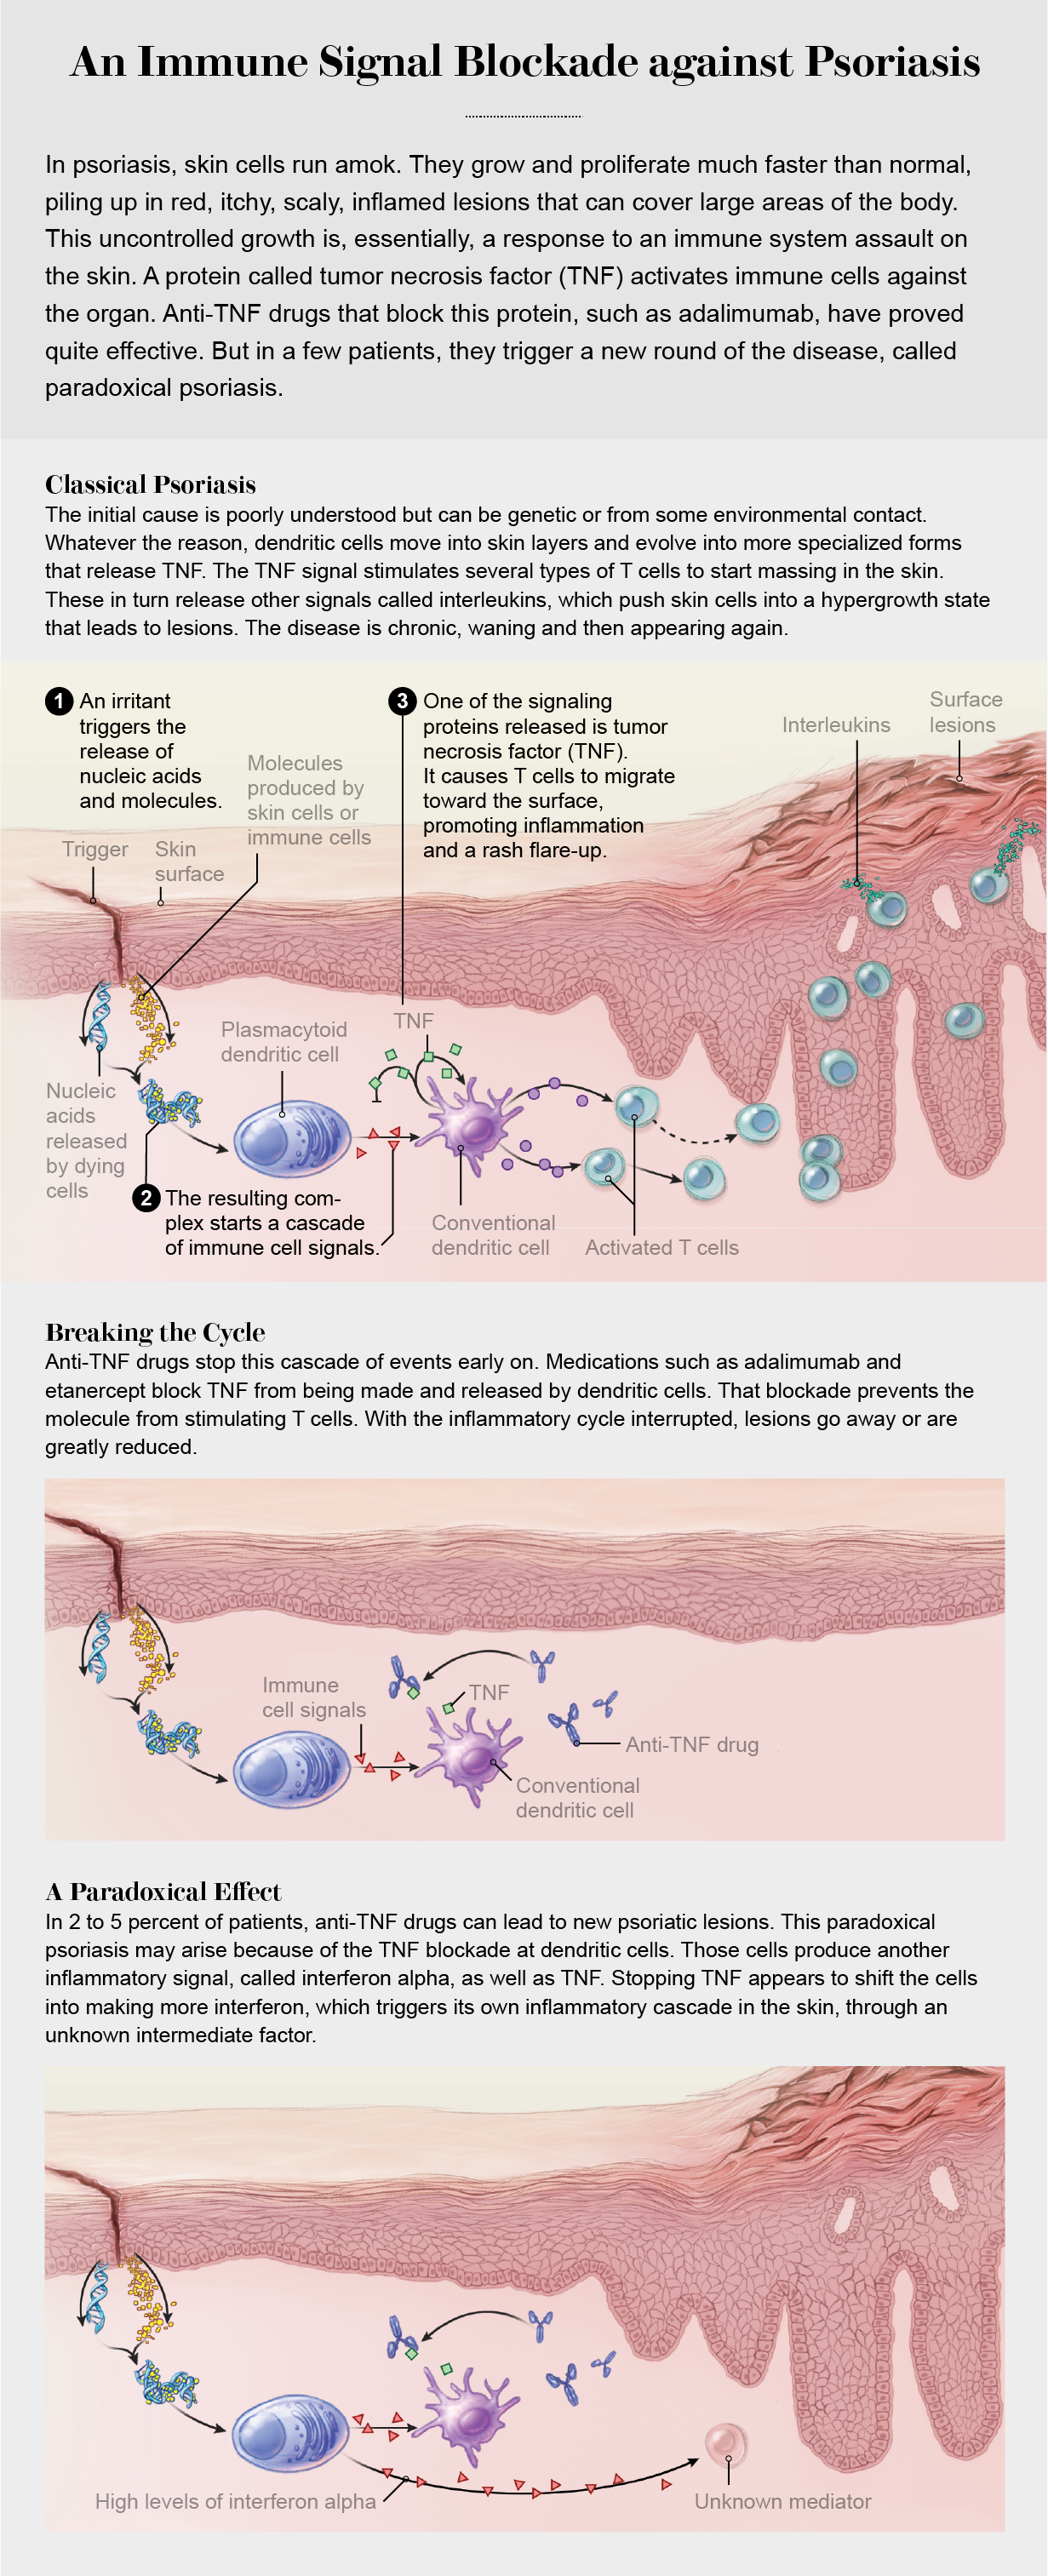 Graphic shows the role of tumor necrosis factor in psoriasis and how anti-TNF drugs can either prevent or exacerbate disease.